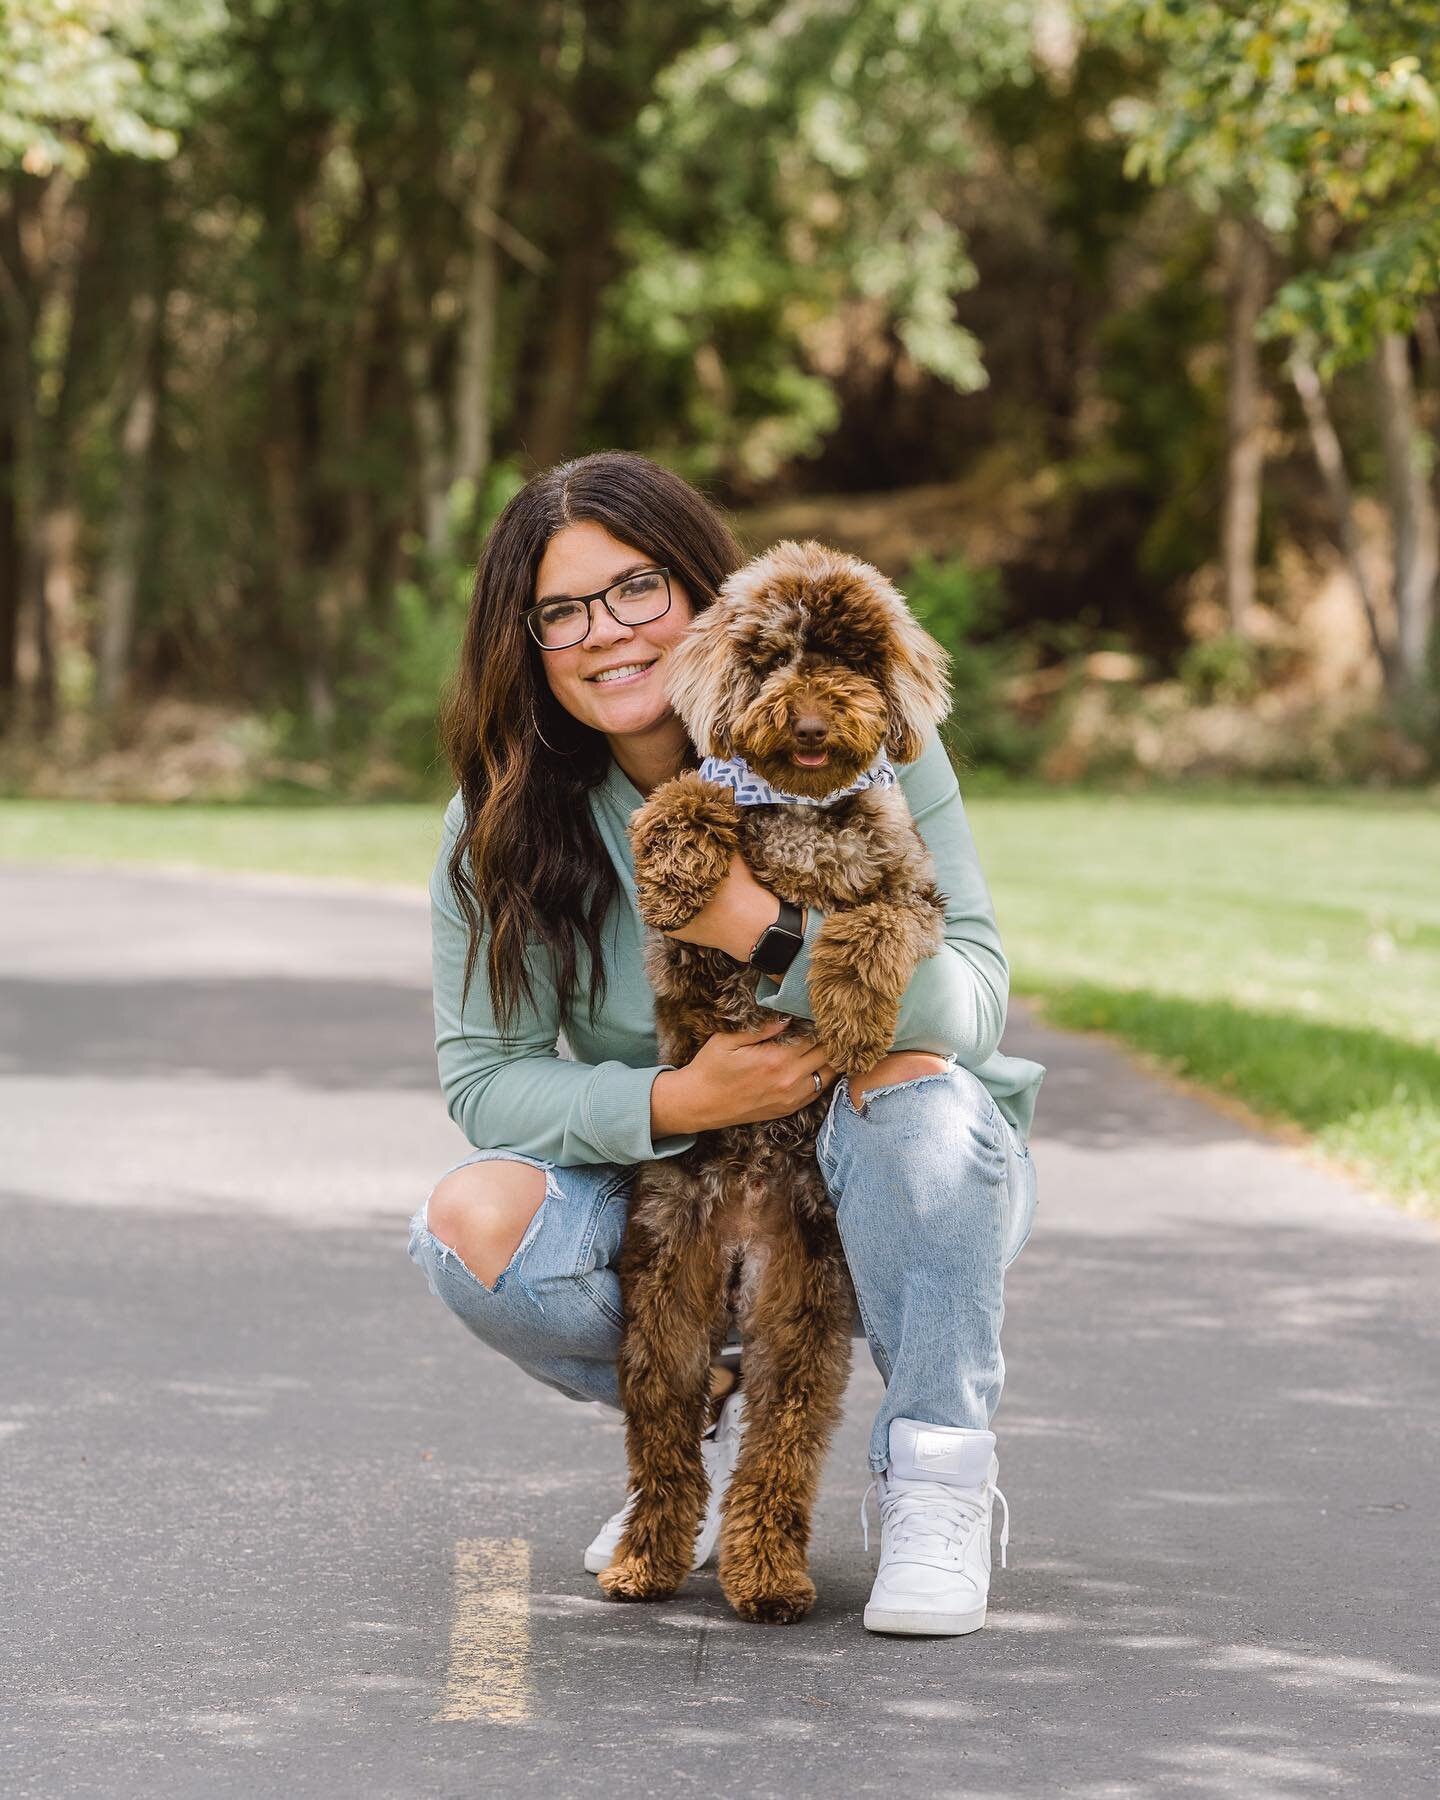 As we continue to grow we are so excited to add La-Shana Francom to our team. La-Shana and I have worked together for years. If you know her, you know exactly why we brought her on! Couldn&rsquo;t be more excited 🙌🏻 

@utahgoldendoodles 
@utahsheep